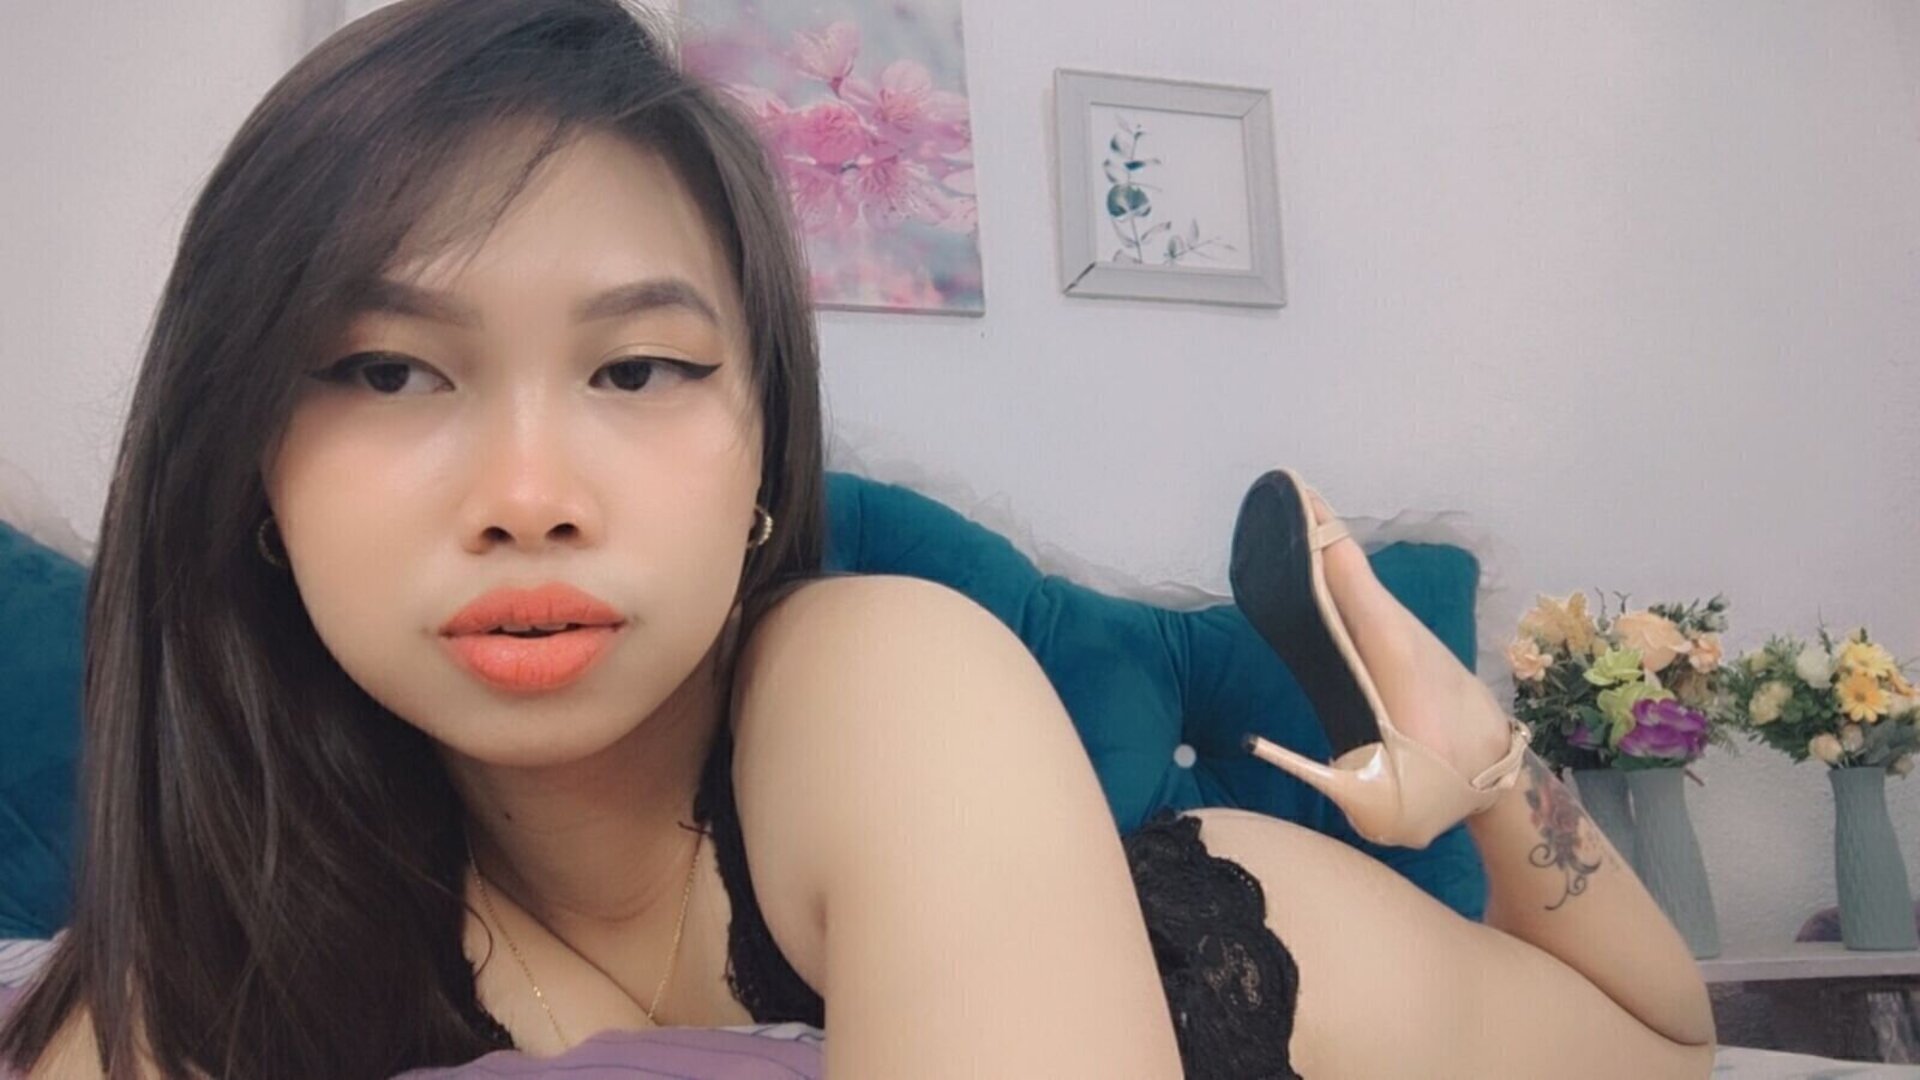 AickoChann's Live Nude Chat